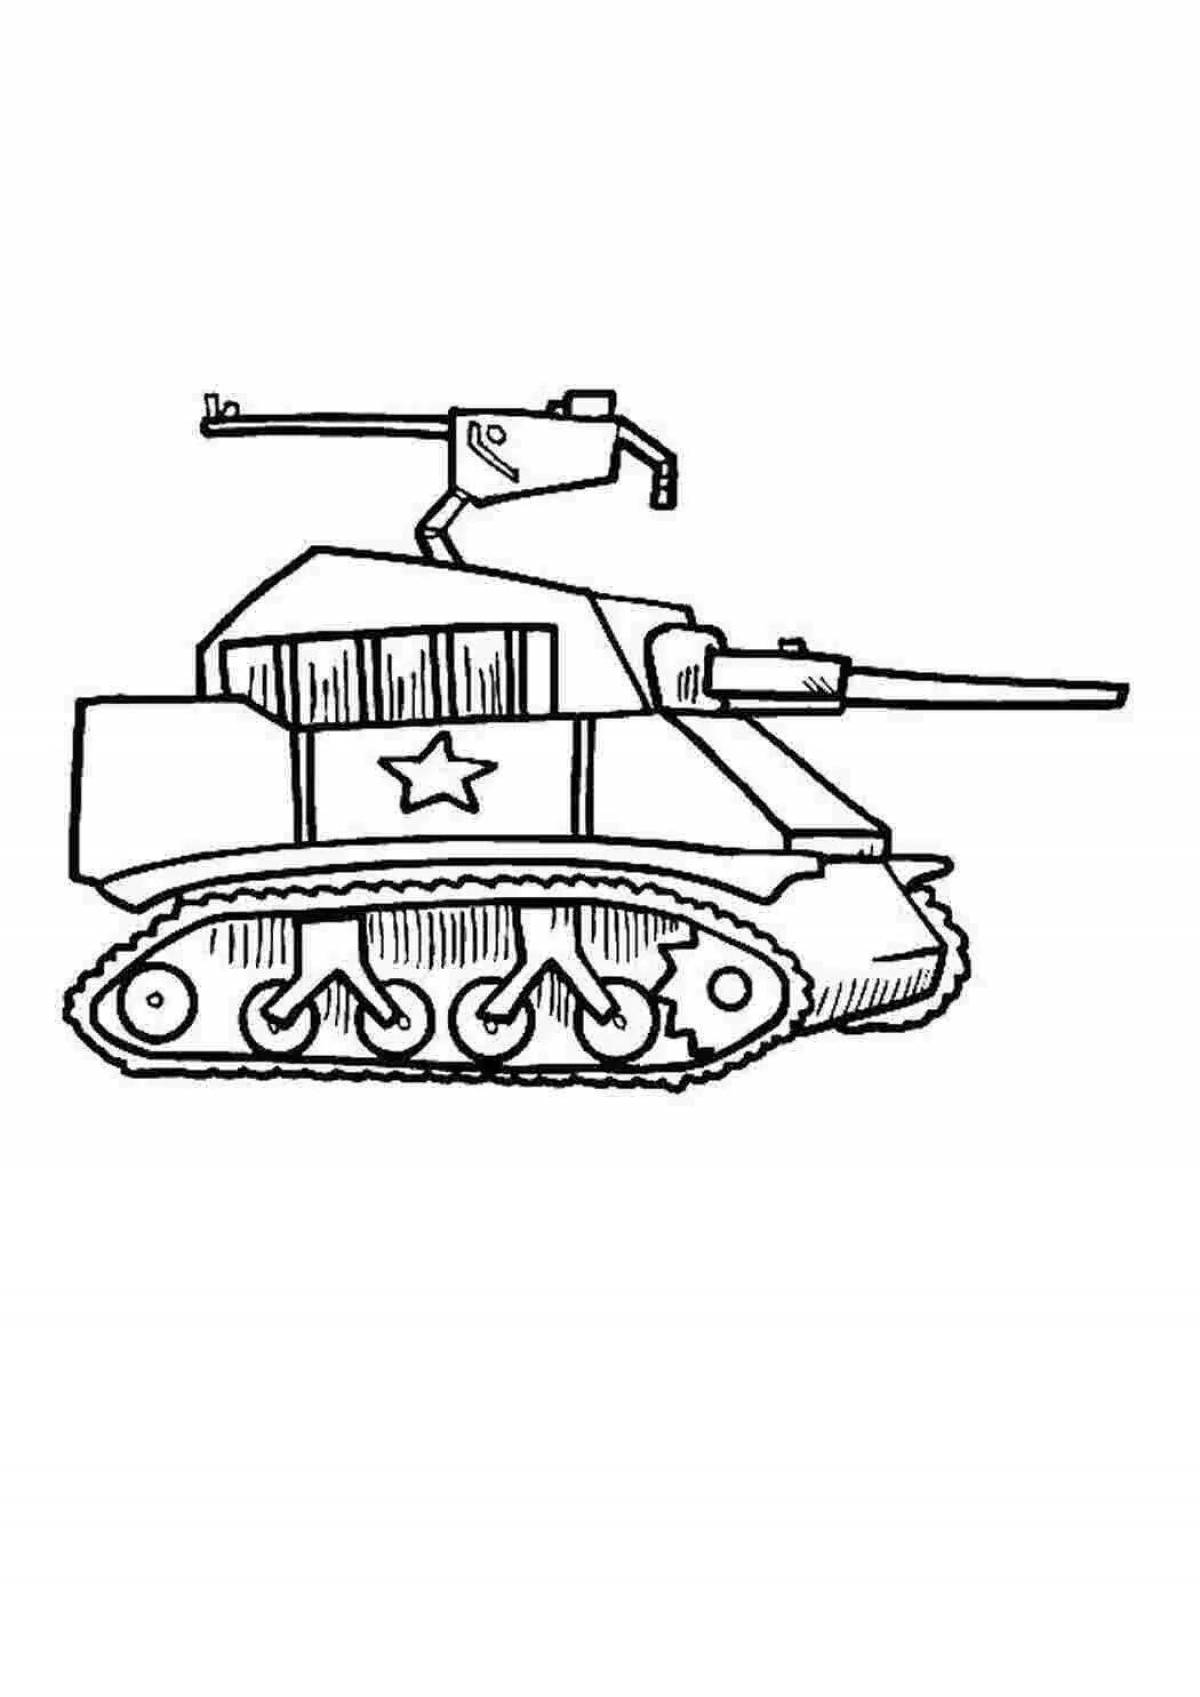 Color of the bewitching kv44 tank